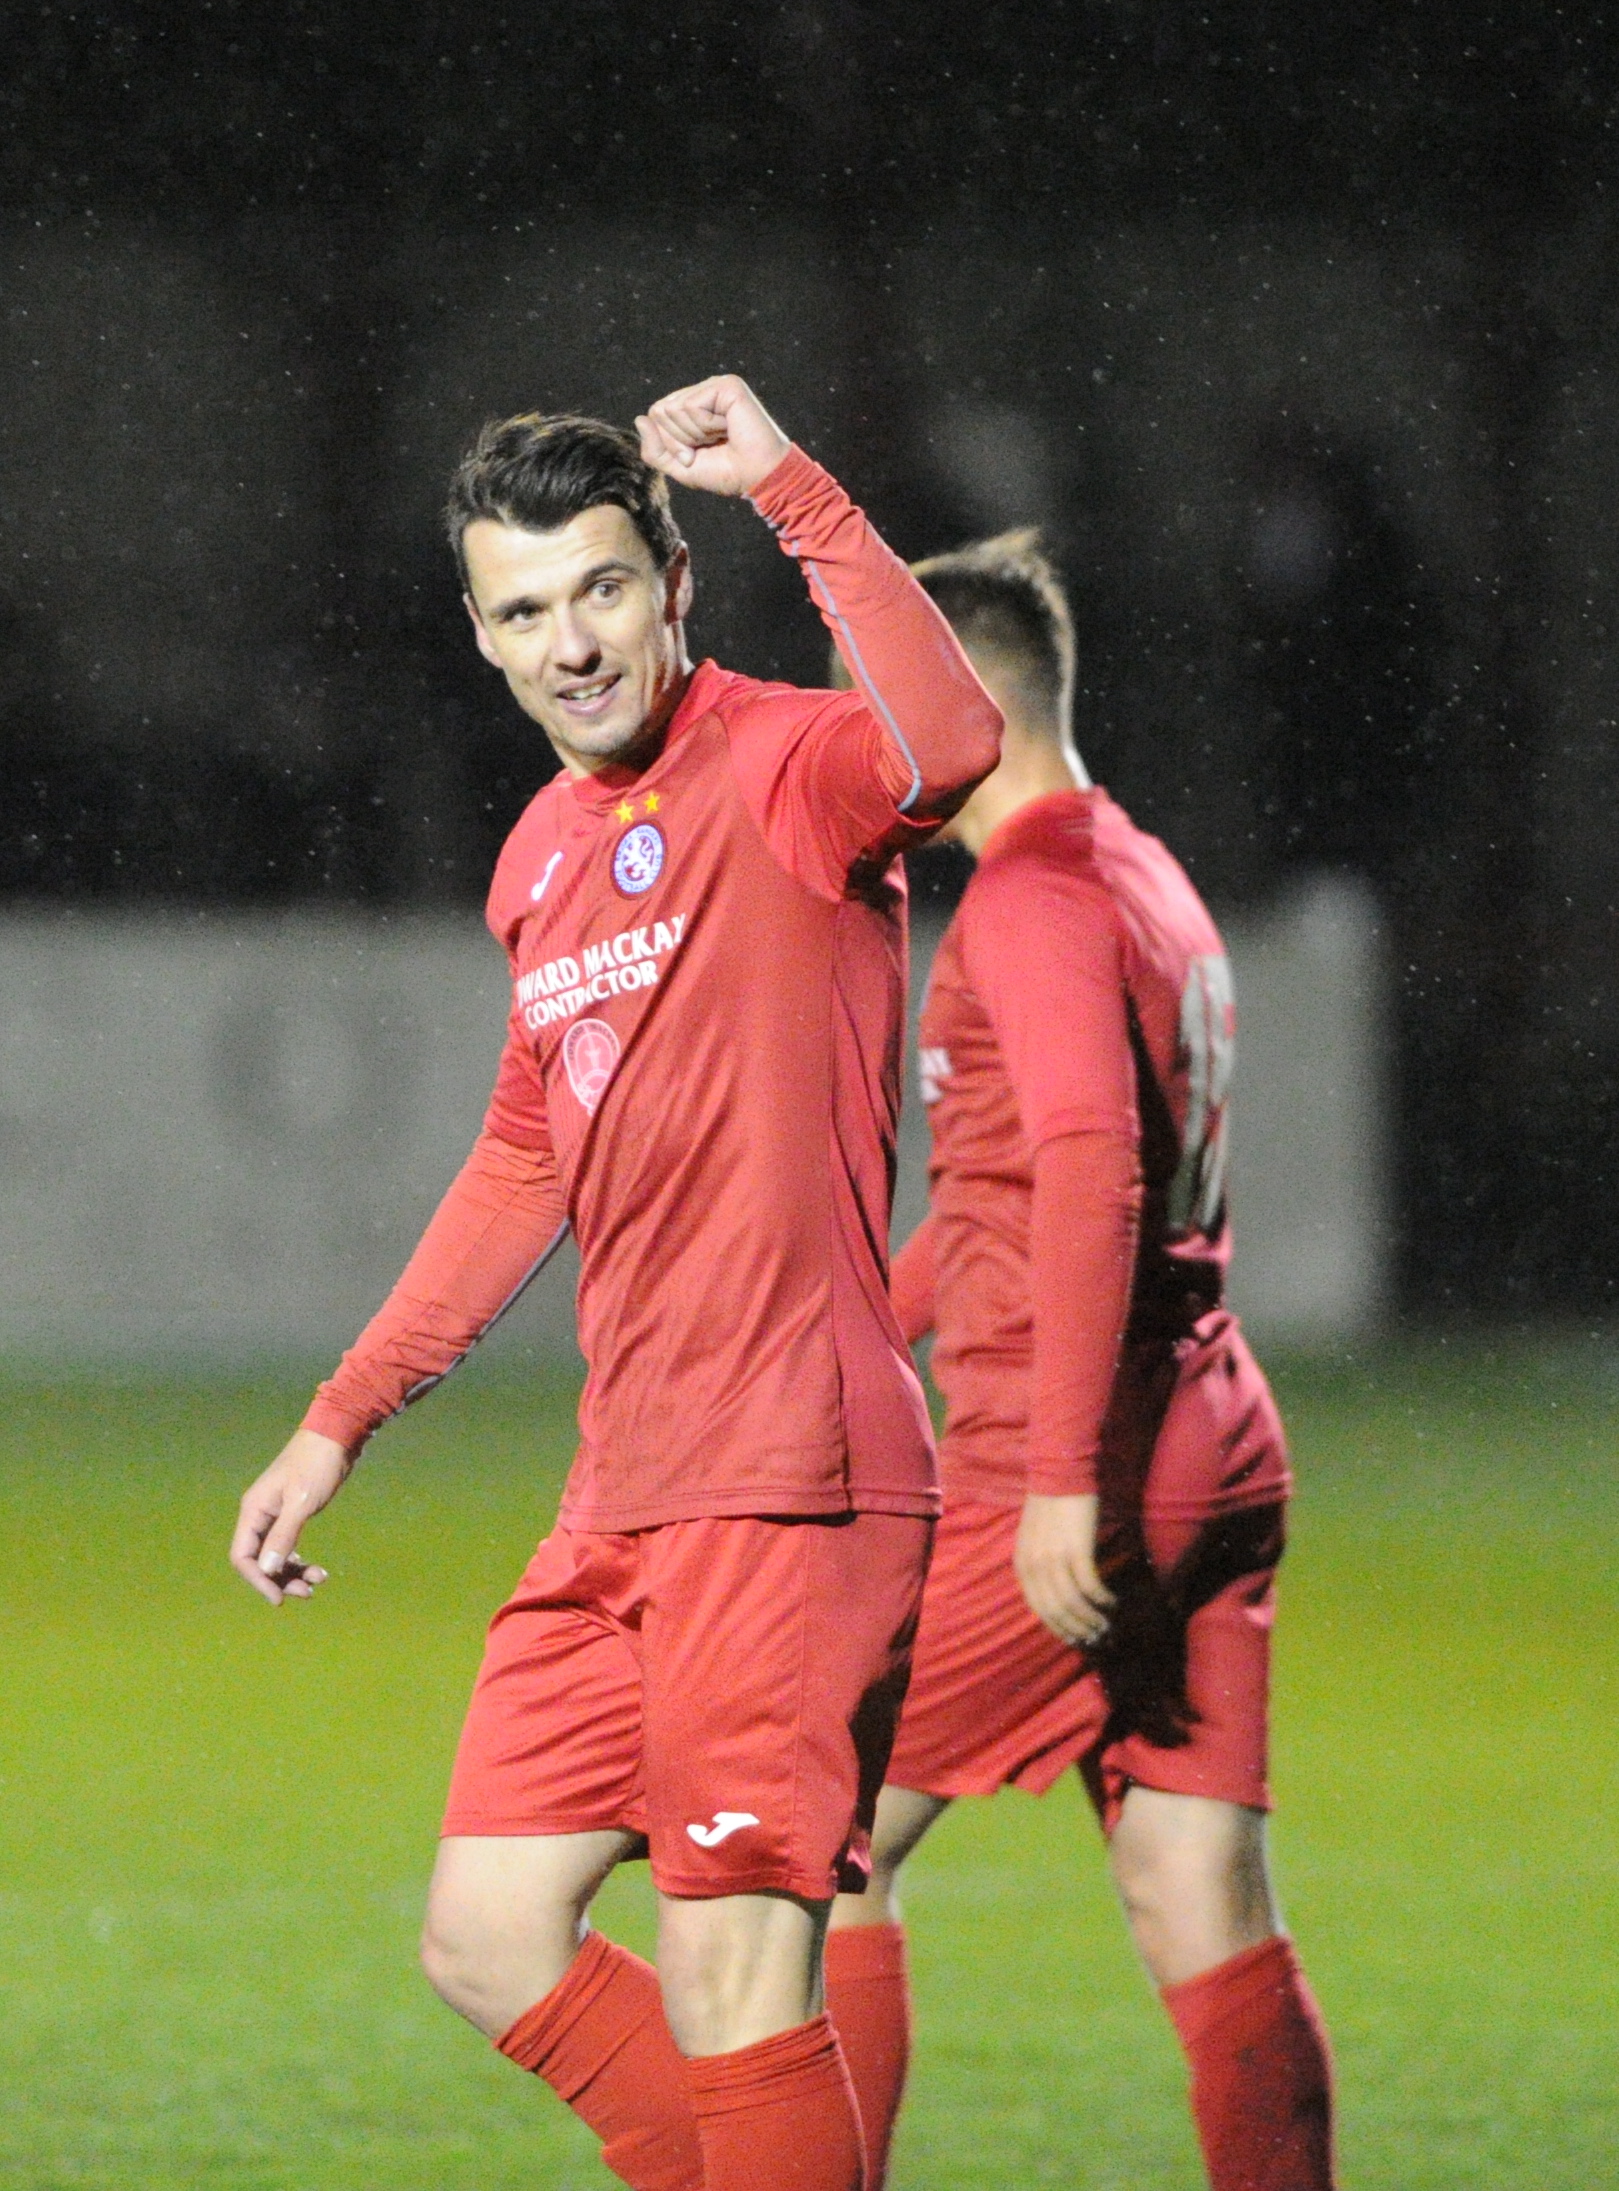 Pictures by JASON HEDGES    
09/11/19 - Brora Rangers v Buckie Thistle 7-0 Breedon Highland League 09-Nov-19 
Picture:Brora 18 - Steven MacKay celebrates after scoring the final goal of the match
Pictures by JASON HEDGES